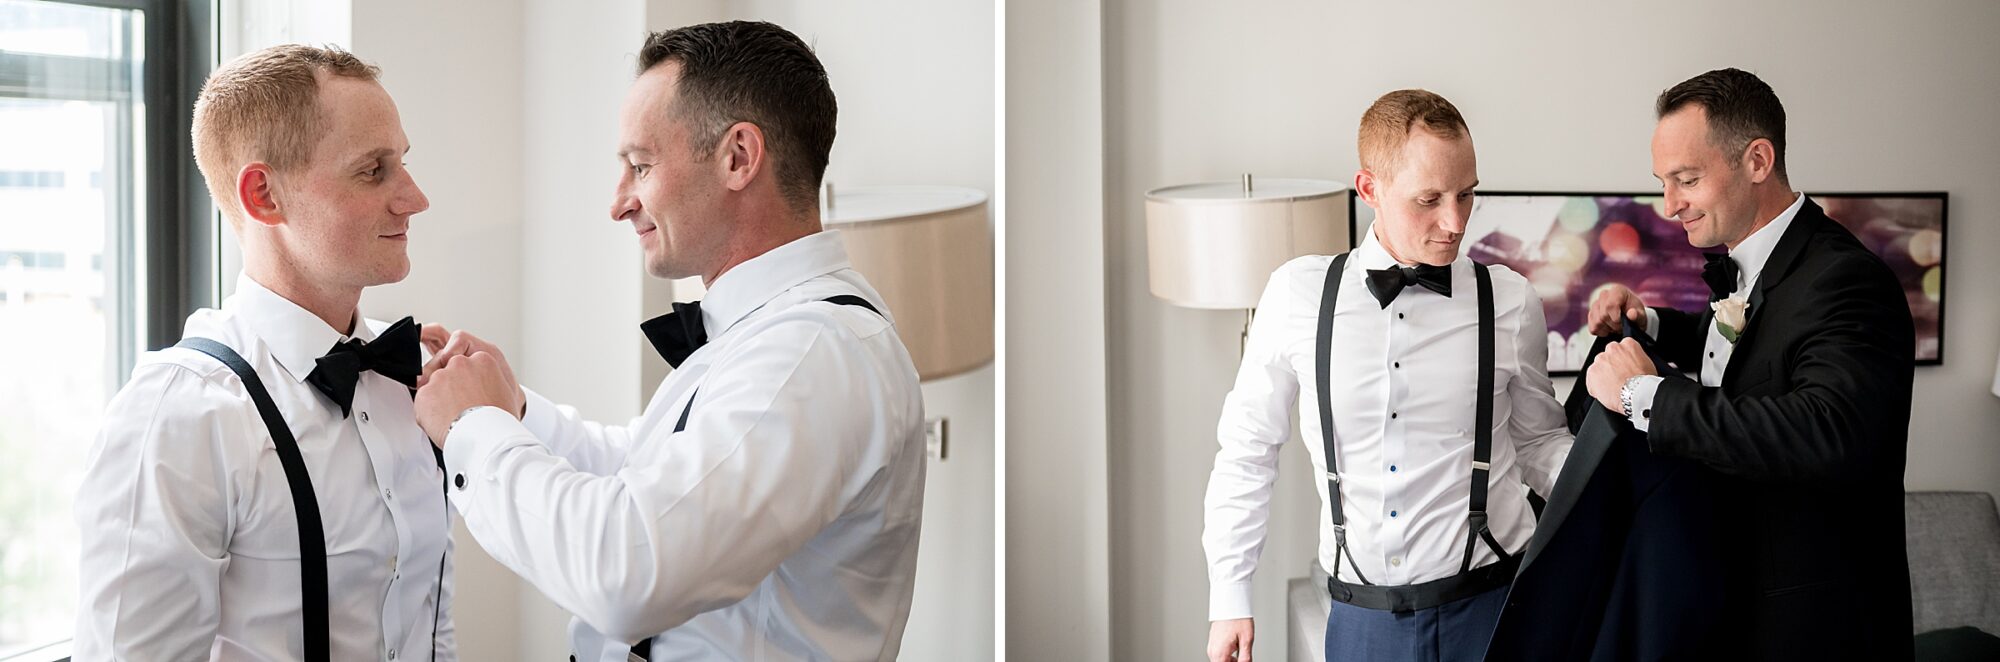 A man in a tuxedo is putting on his suspenders.